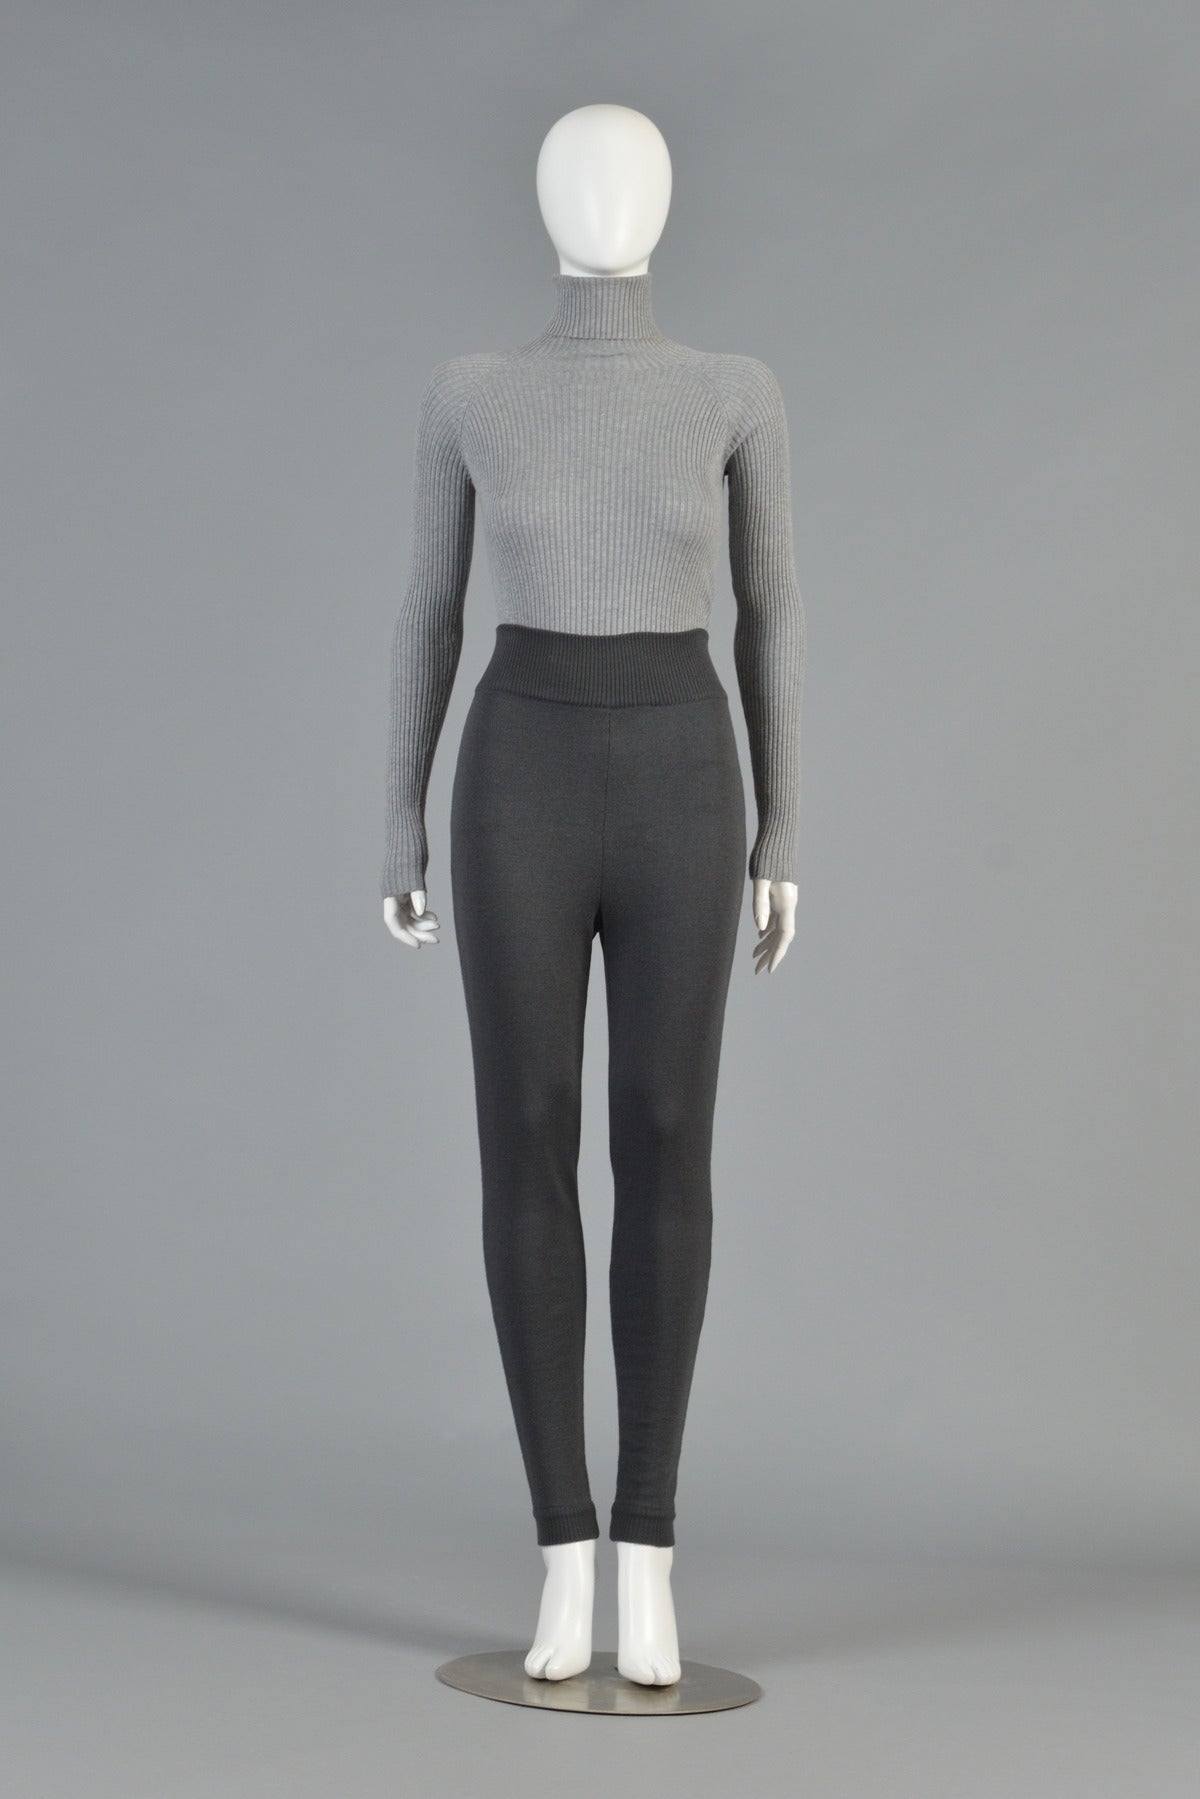 Super great 1980s Claude Montana knit pants. Dark charcoal grey with high waist and super skinny fitting legs. 100% wool. Ultra soft and luxe. Not at all scratchy.  Excellent vintage condition. Best fits size medium/large. Tagged size